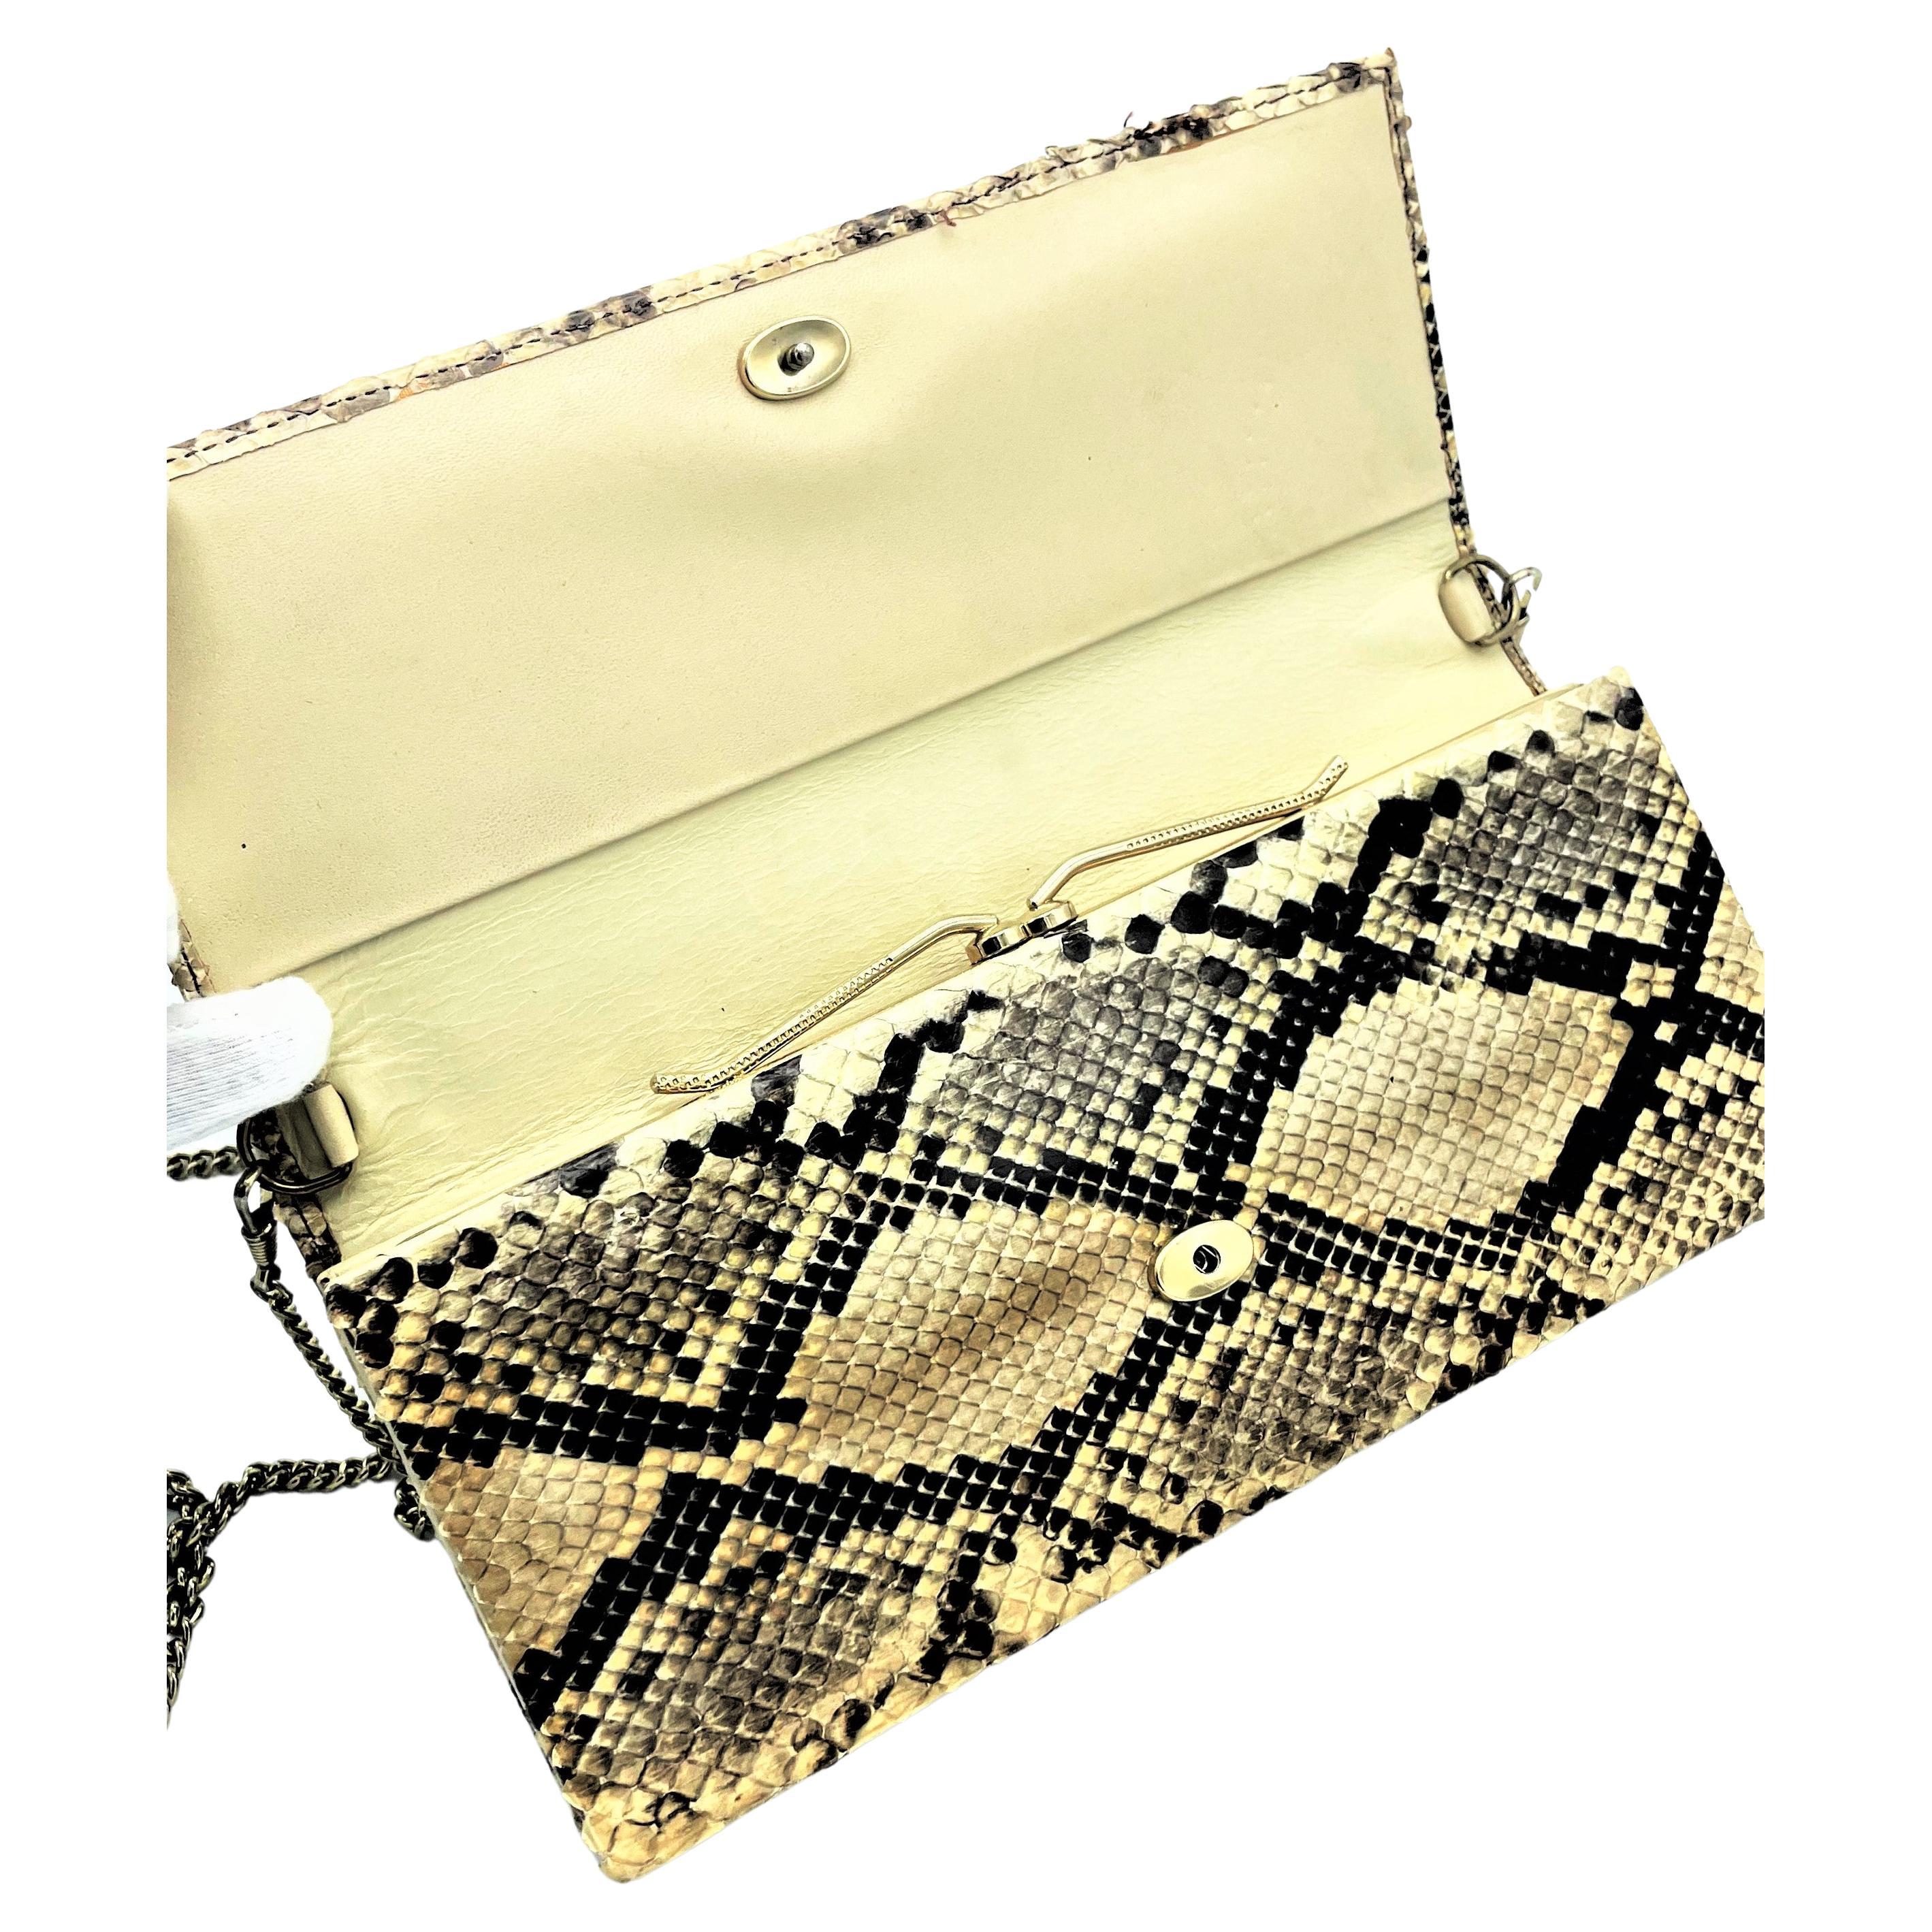 A beautiful and well-preserved snake clutch, inside with 2 long compartments, one with a clasp and one open compartment. Inside lined with leather. There is also an open compartment on the back and detachable 105 cm long chain. Very good